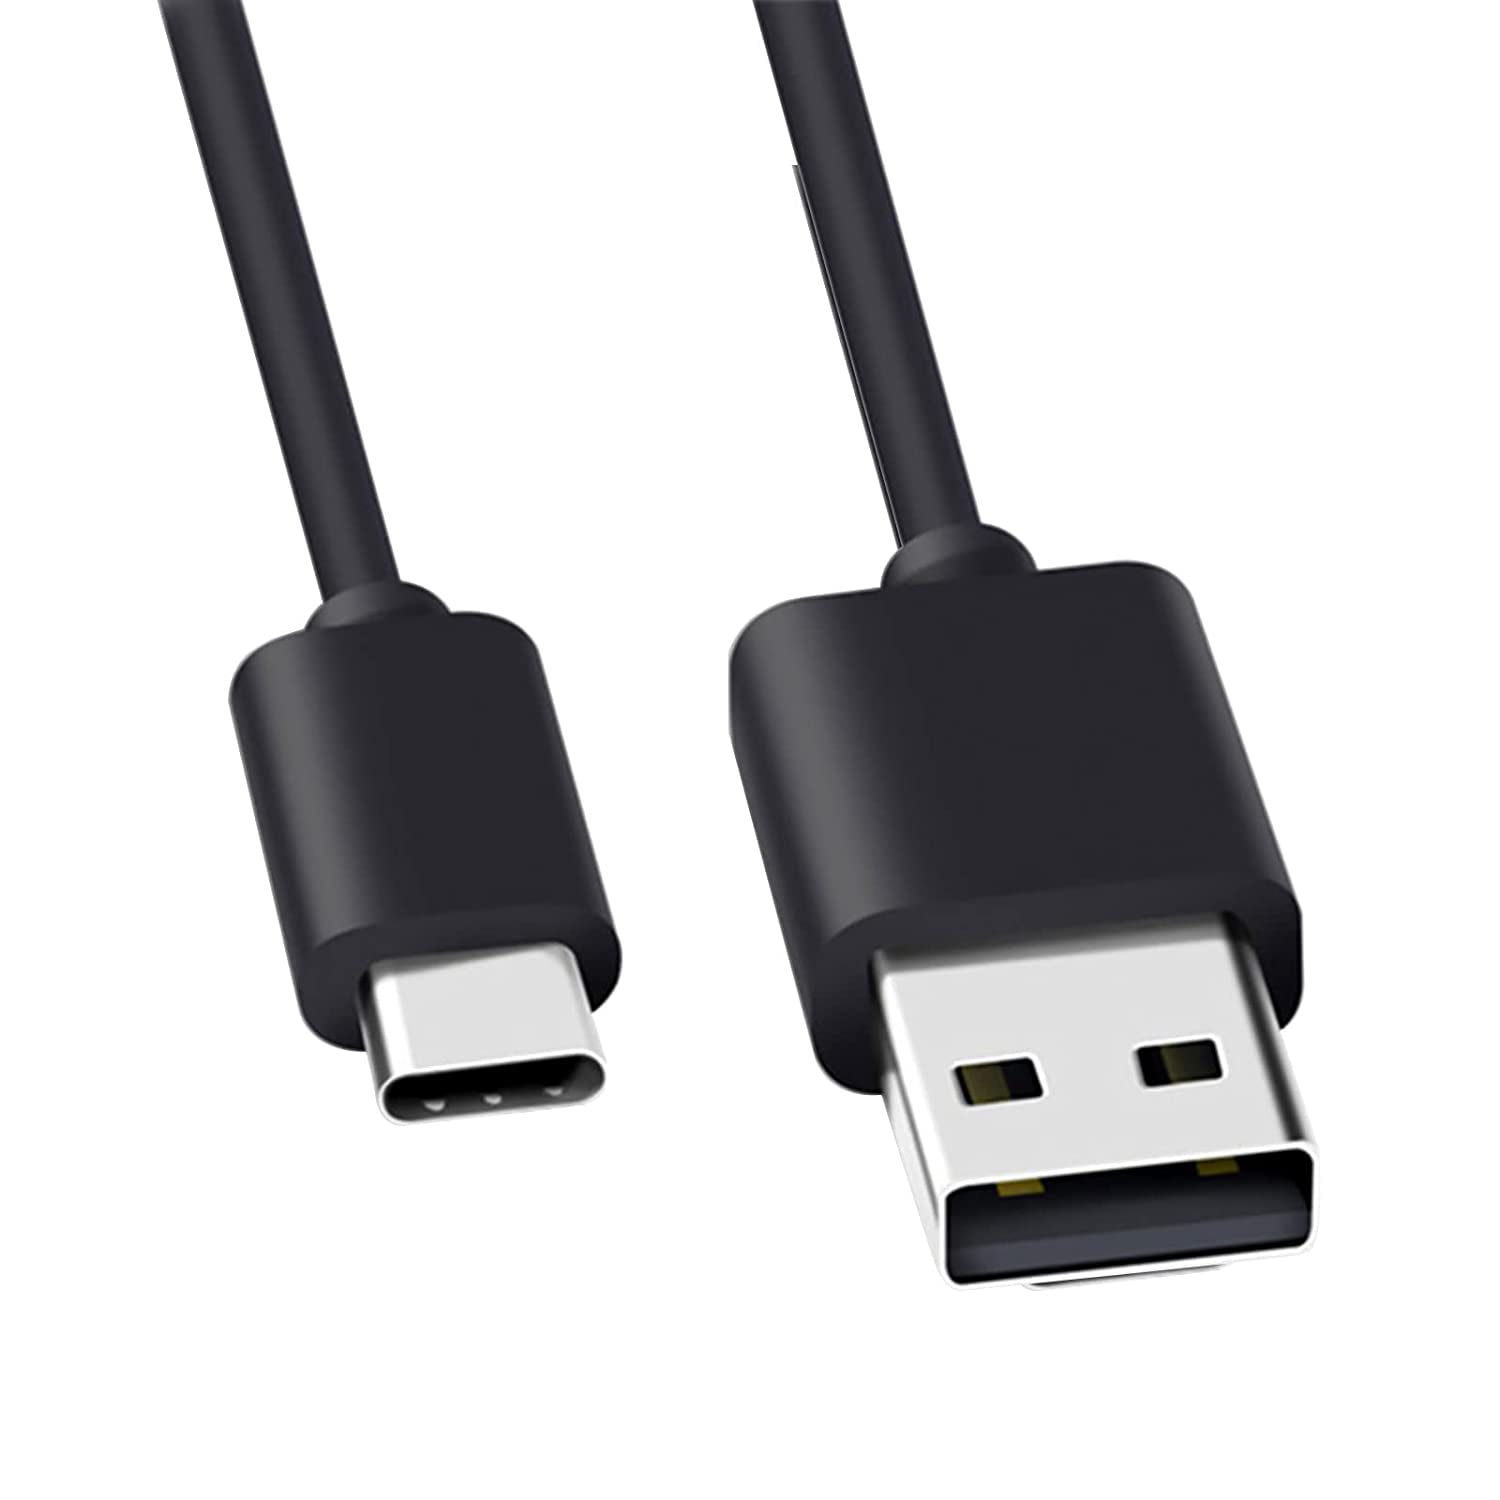 USB-C Charger Cable Wire Fast Charging Power Cord for TOZO T12 A1 T10 T9 T12 Pro G1 NC9 NC2 W1 W3 W8 PB1 PB2 - Walmart.com